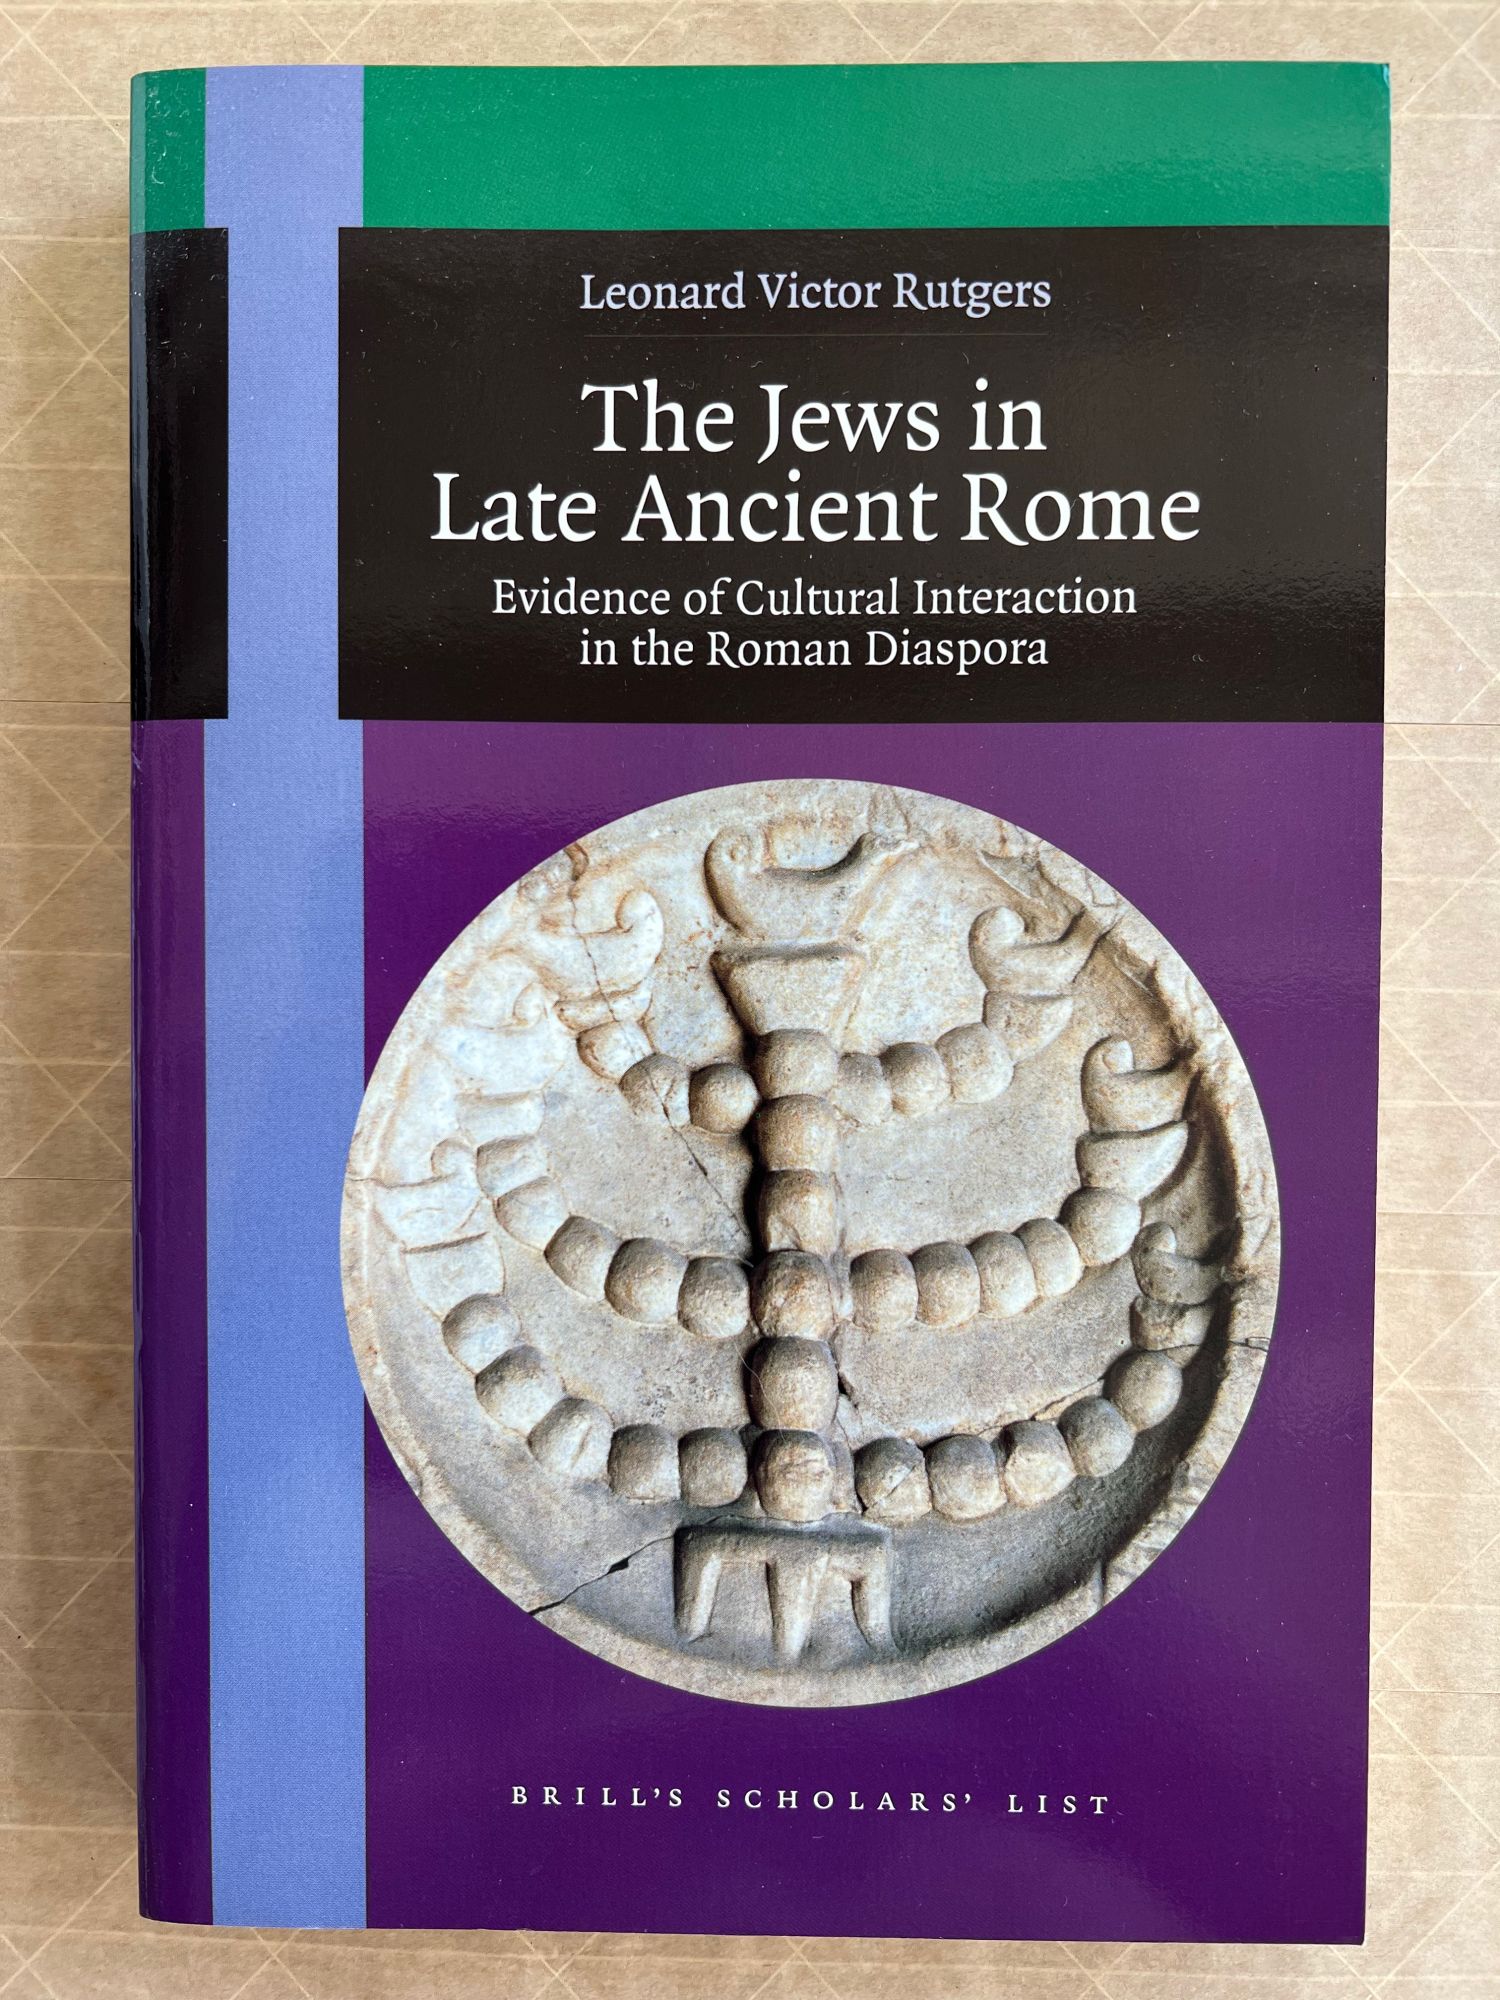 The Jews in late ancient Rome : evidence of cultural interaction in the Roman diaspora - Rutgers, Leonard Victor